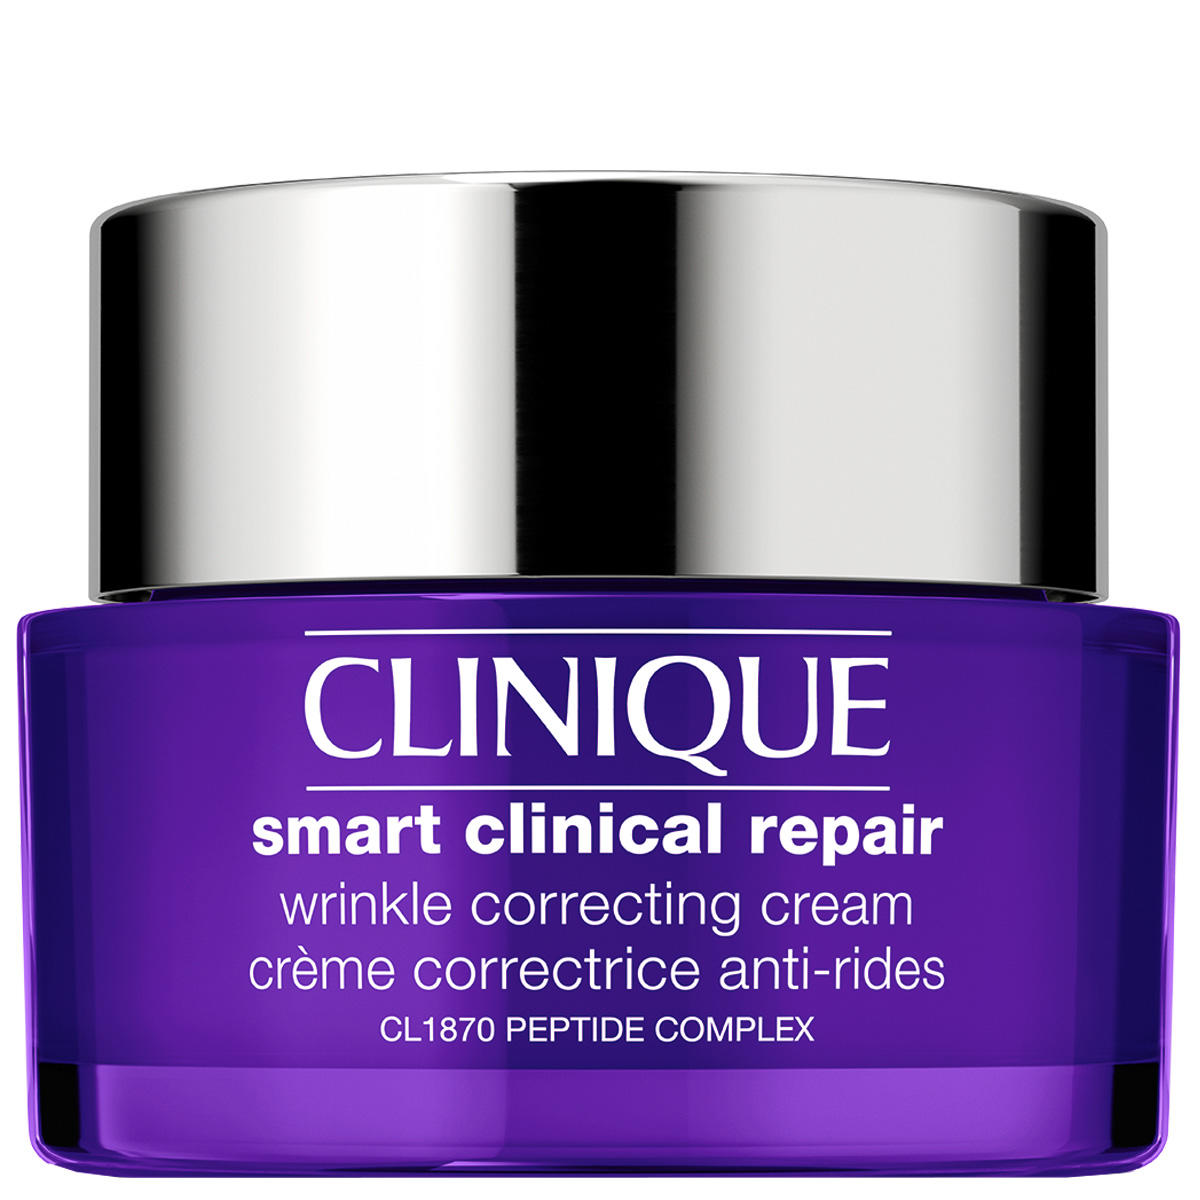 Clinique Smart Clinical Repair Wrinkle Correcting Cream  - 1